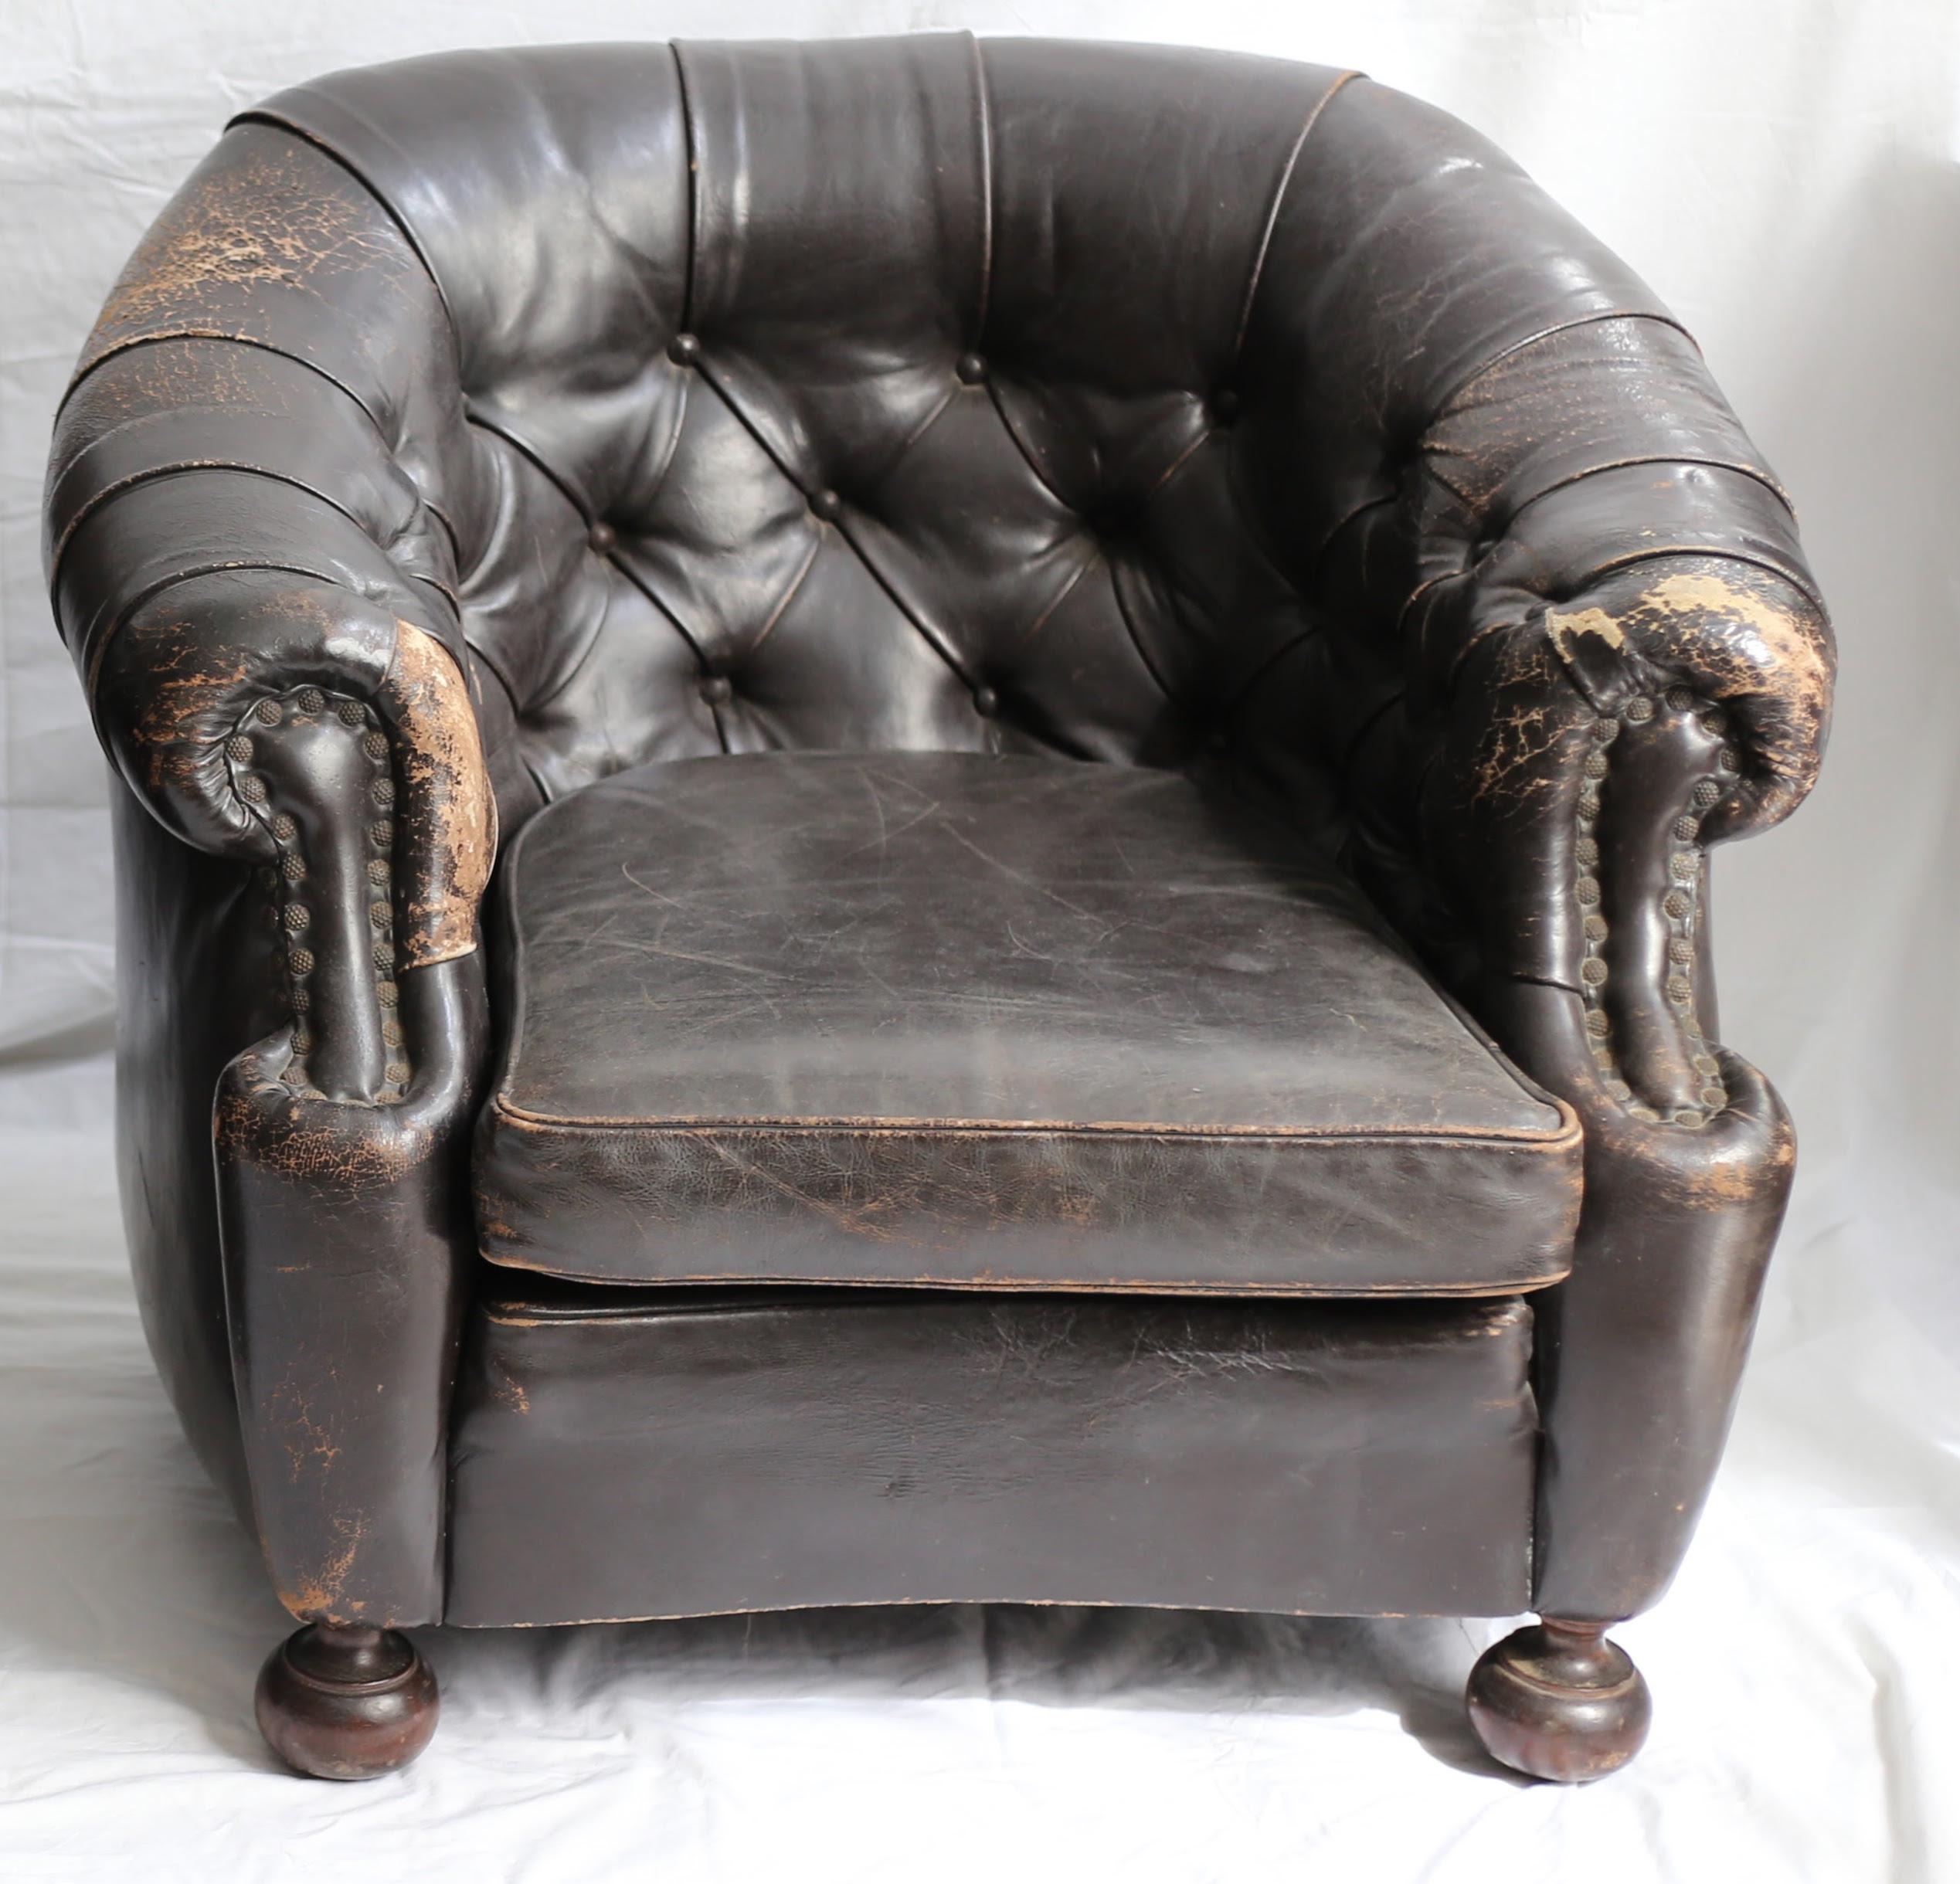 Vintage Pair of Leather Chesterfield Club Chairs In Distressed Condition For Sale In West Hollywood, CA